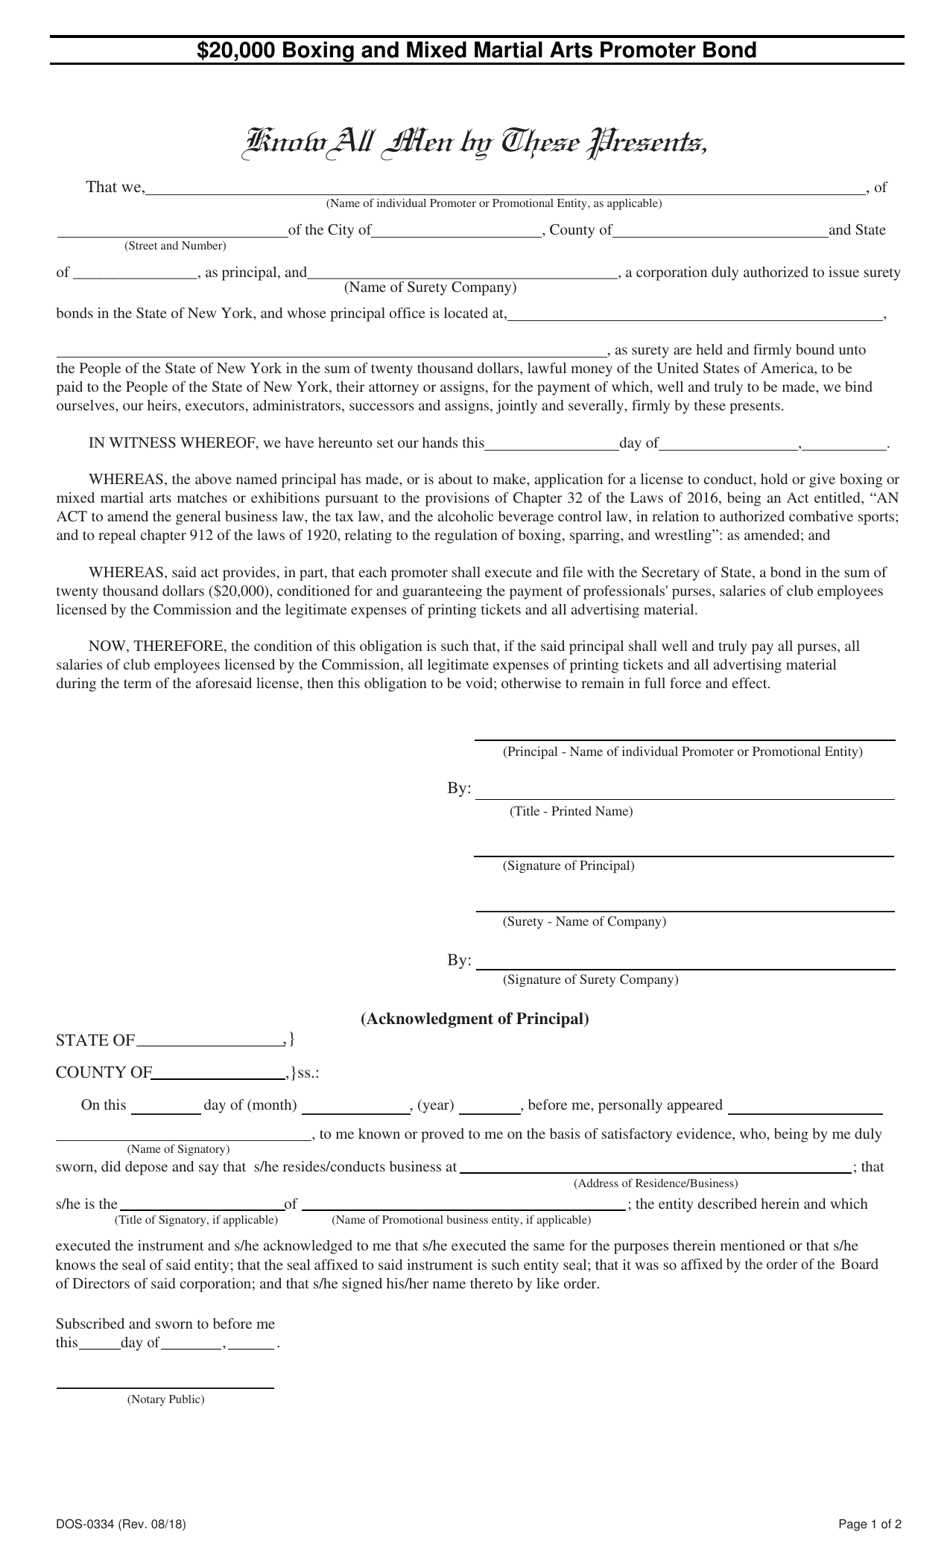 Form DOS-0334 $20,000 Boxing and Mixed Martial Arts Promoter Bond - New York, Page 1